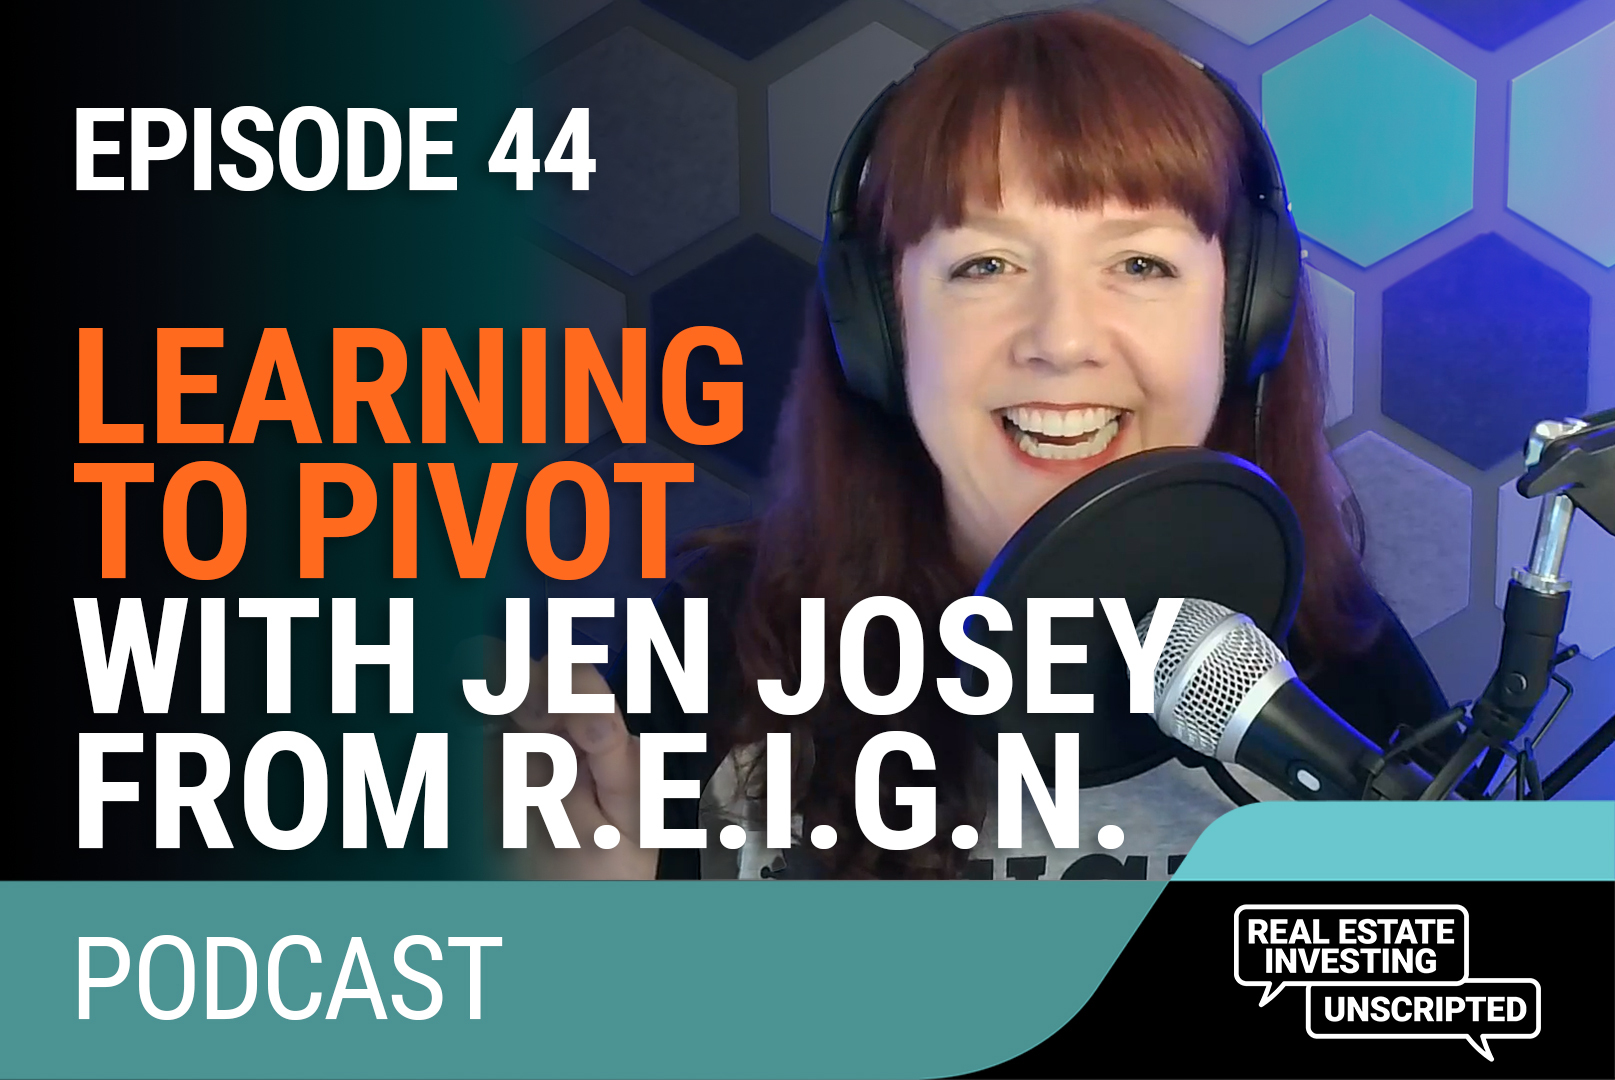 Jen Josey from the REIGN podcast on Real Estate Investing Unscripted.